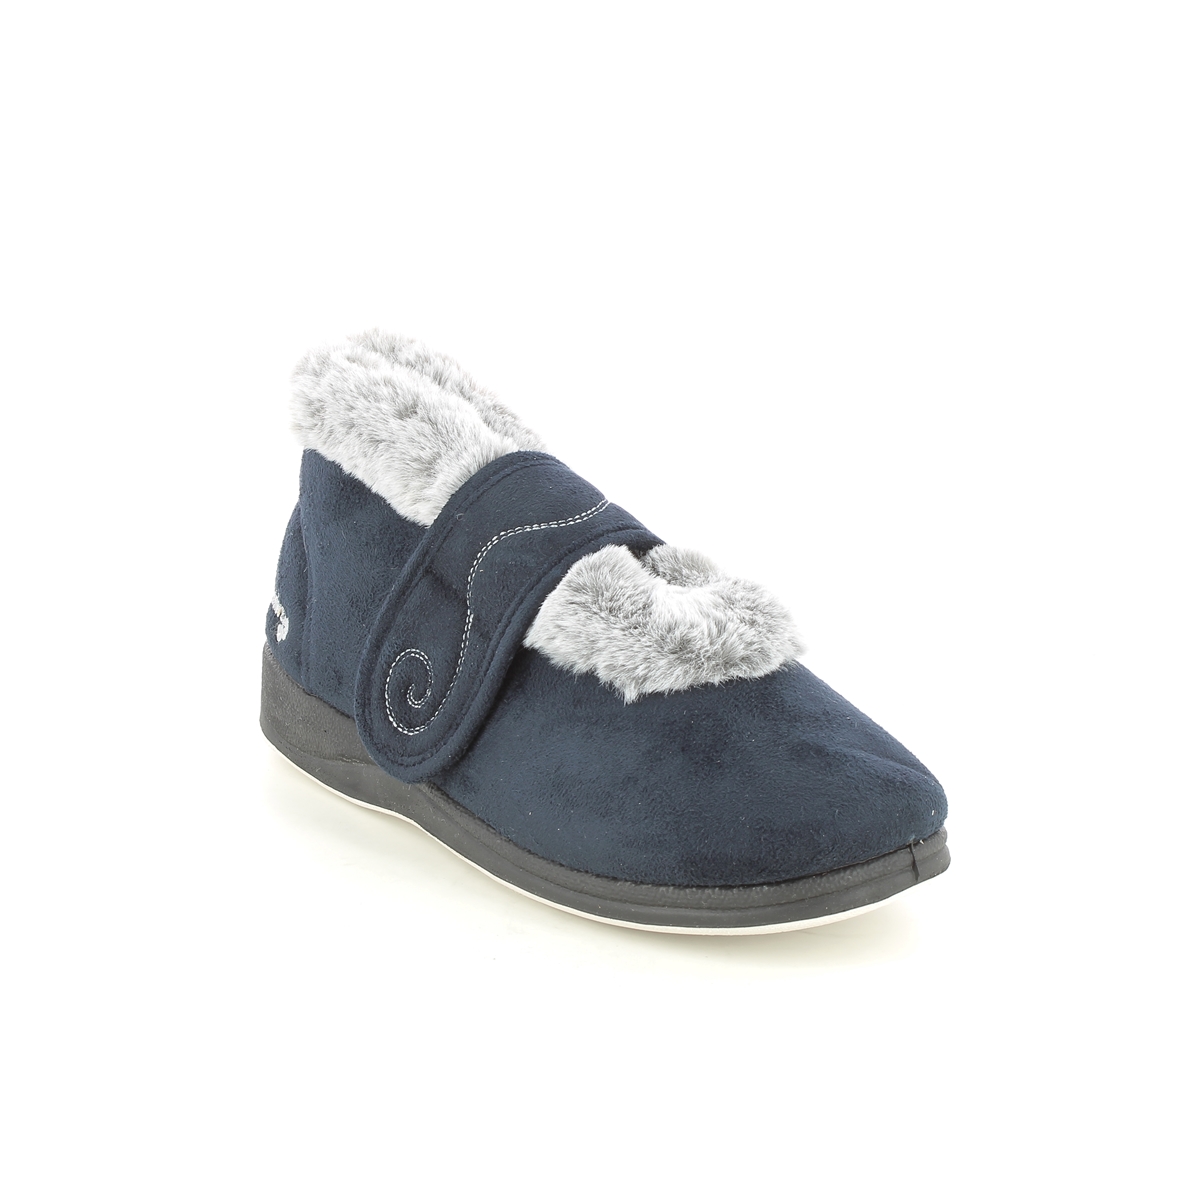 Padders Hush Navy Womens slippers 409-24 in a Plain Textile in Size 9